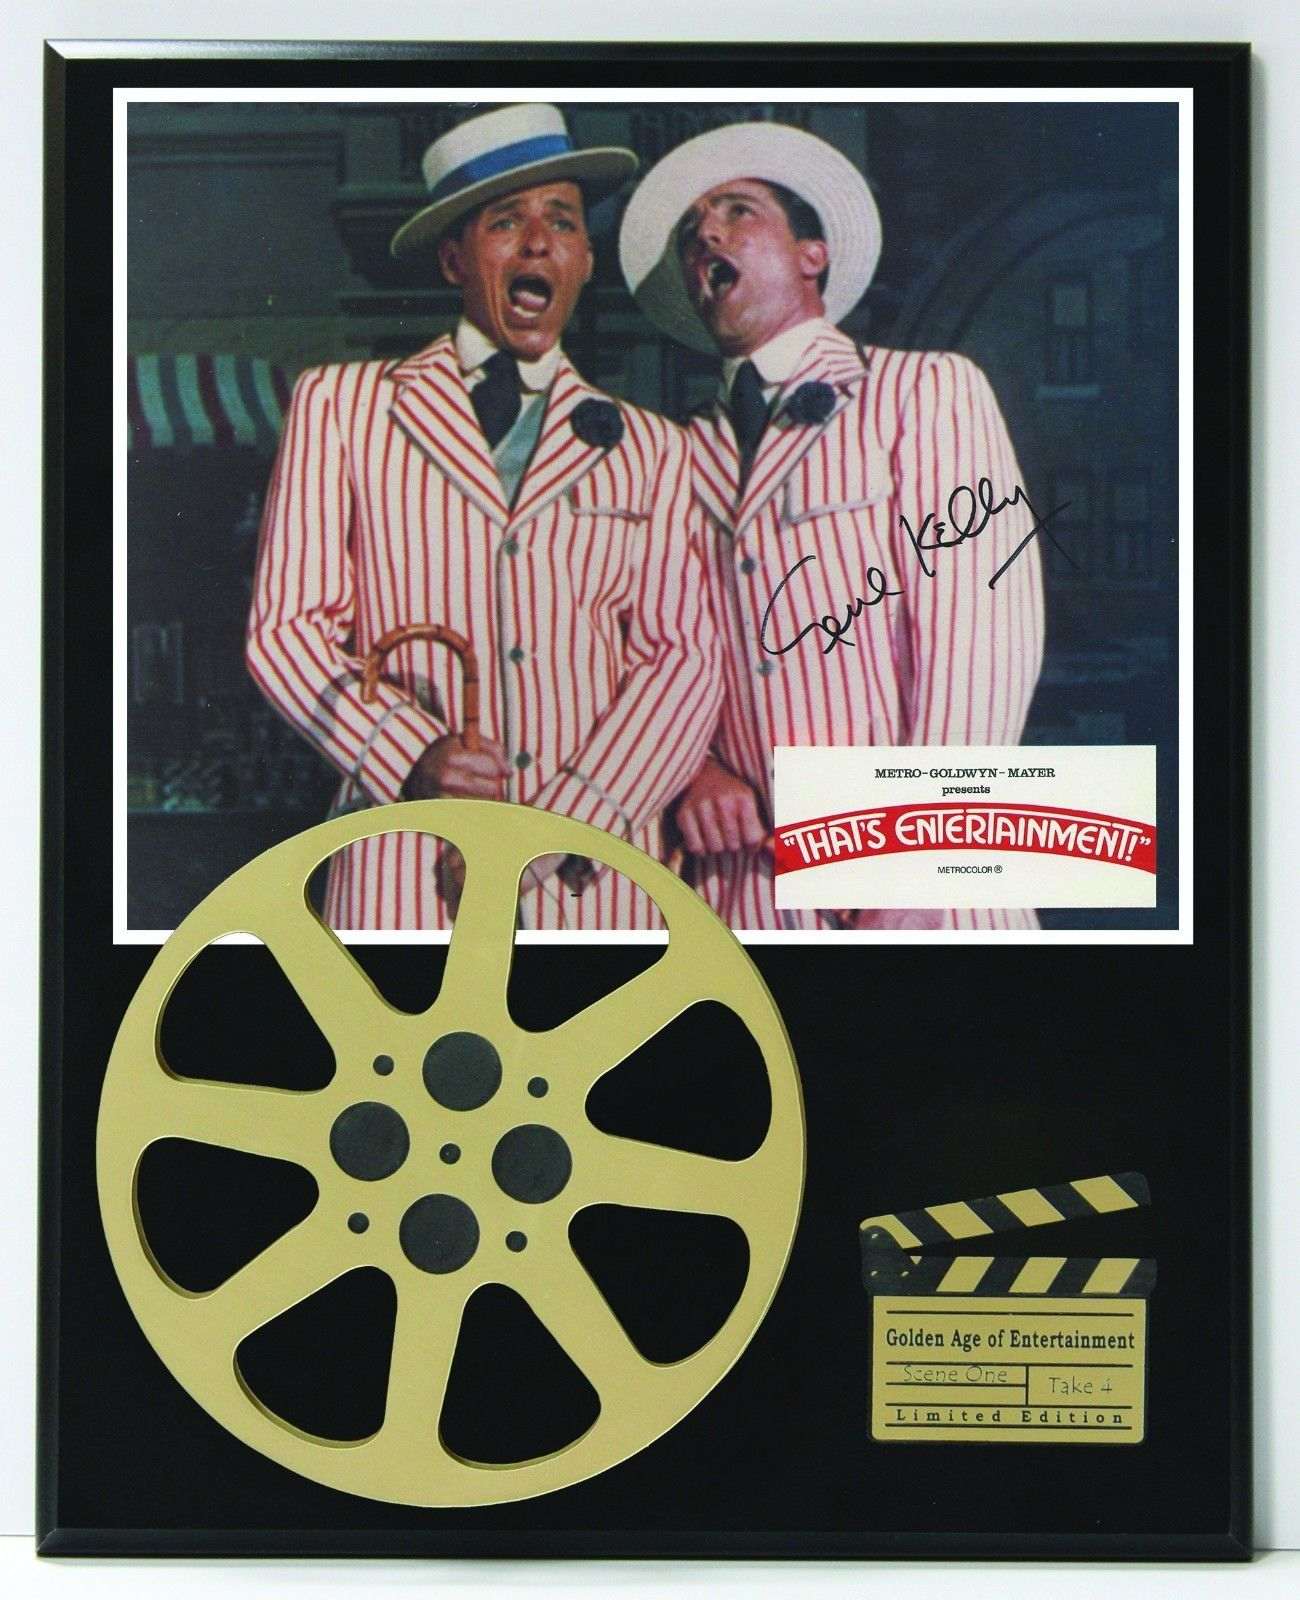 https://goldrecordoutlet.com/wp-content/uploads/imported/7/Gene-Kelly-Limited-Edition-Reproduction-Signature-Film-Reel-Display-K1-182328777067.jpg